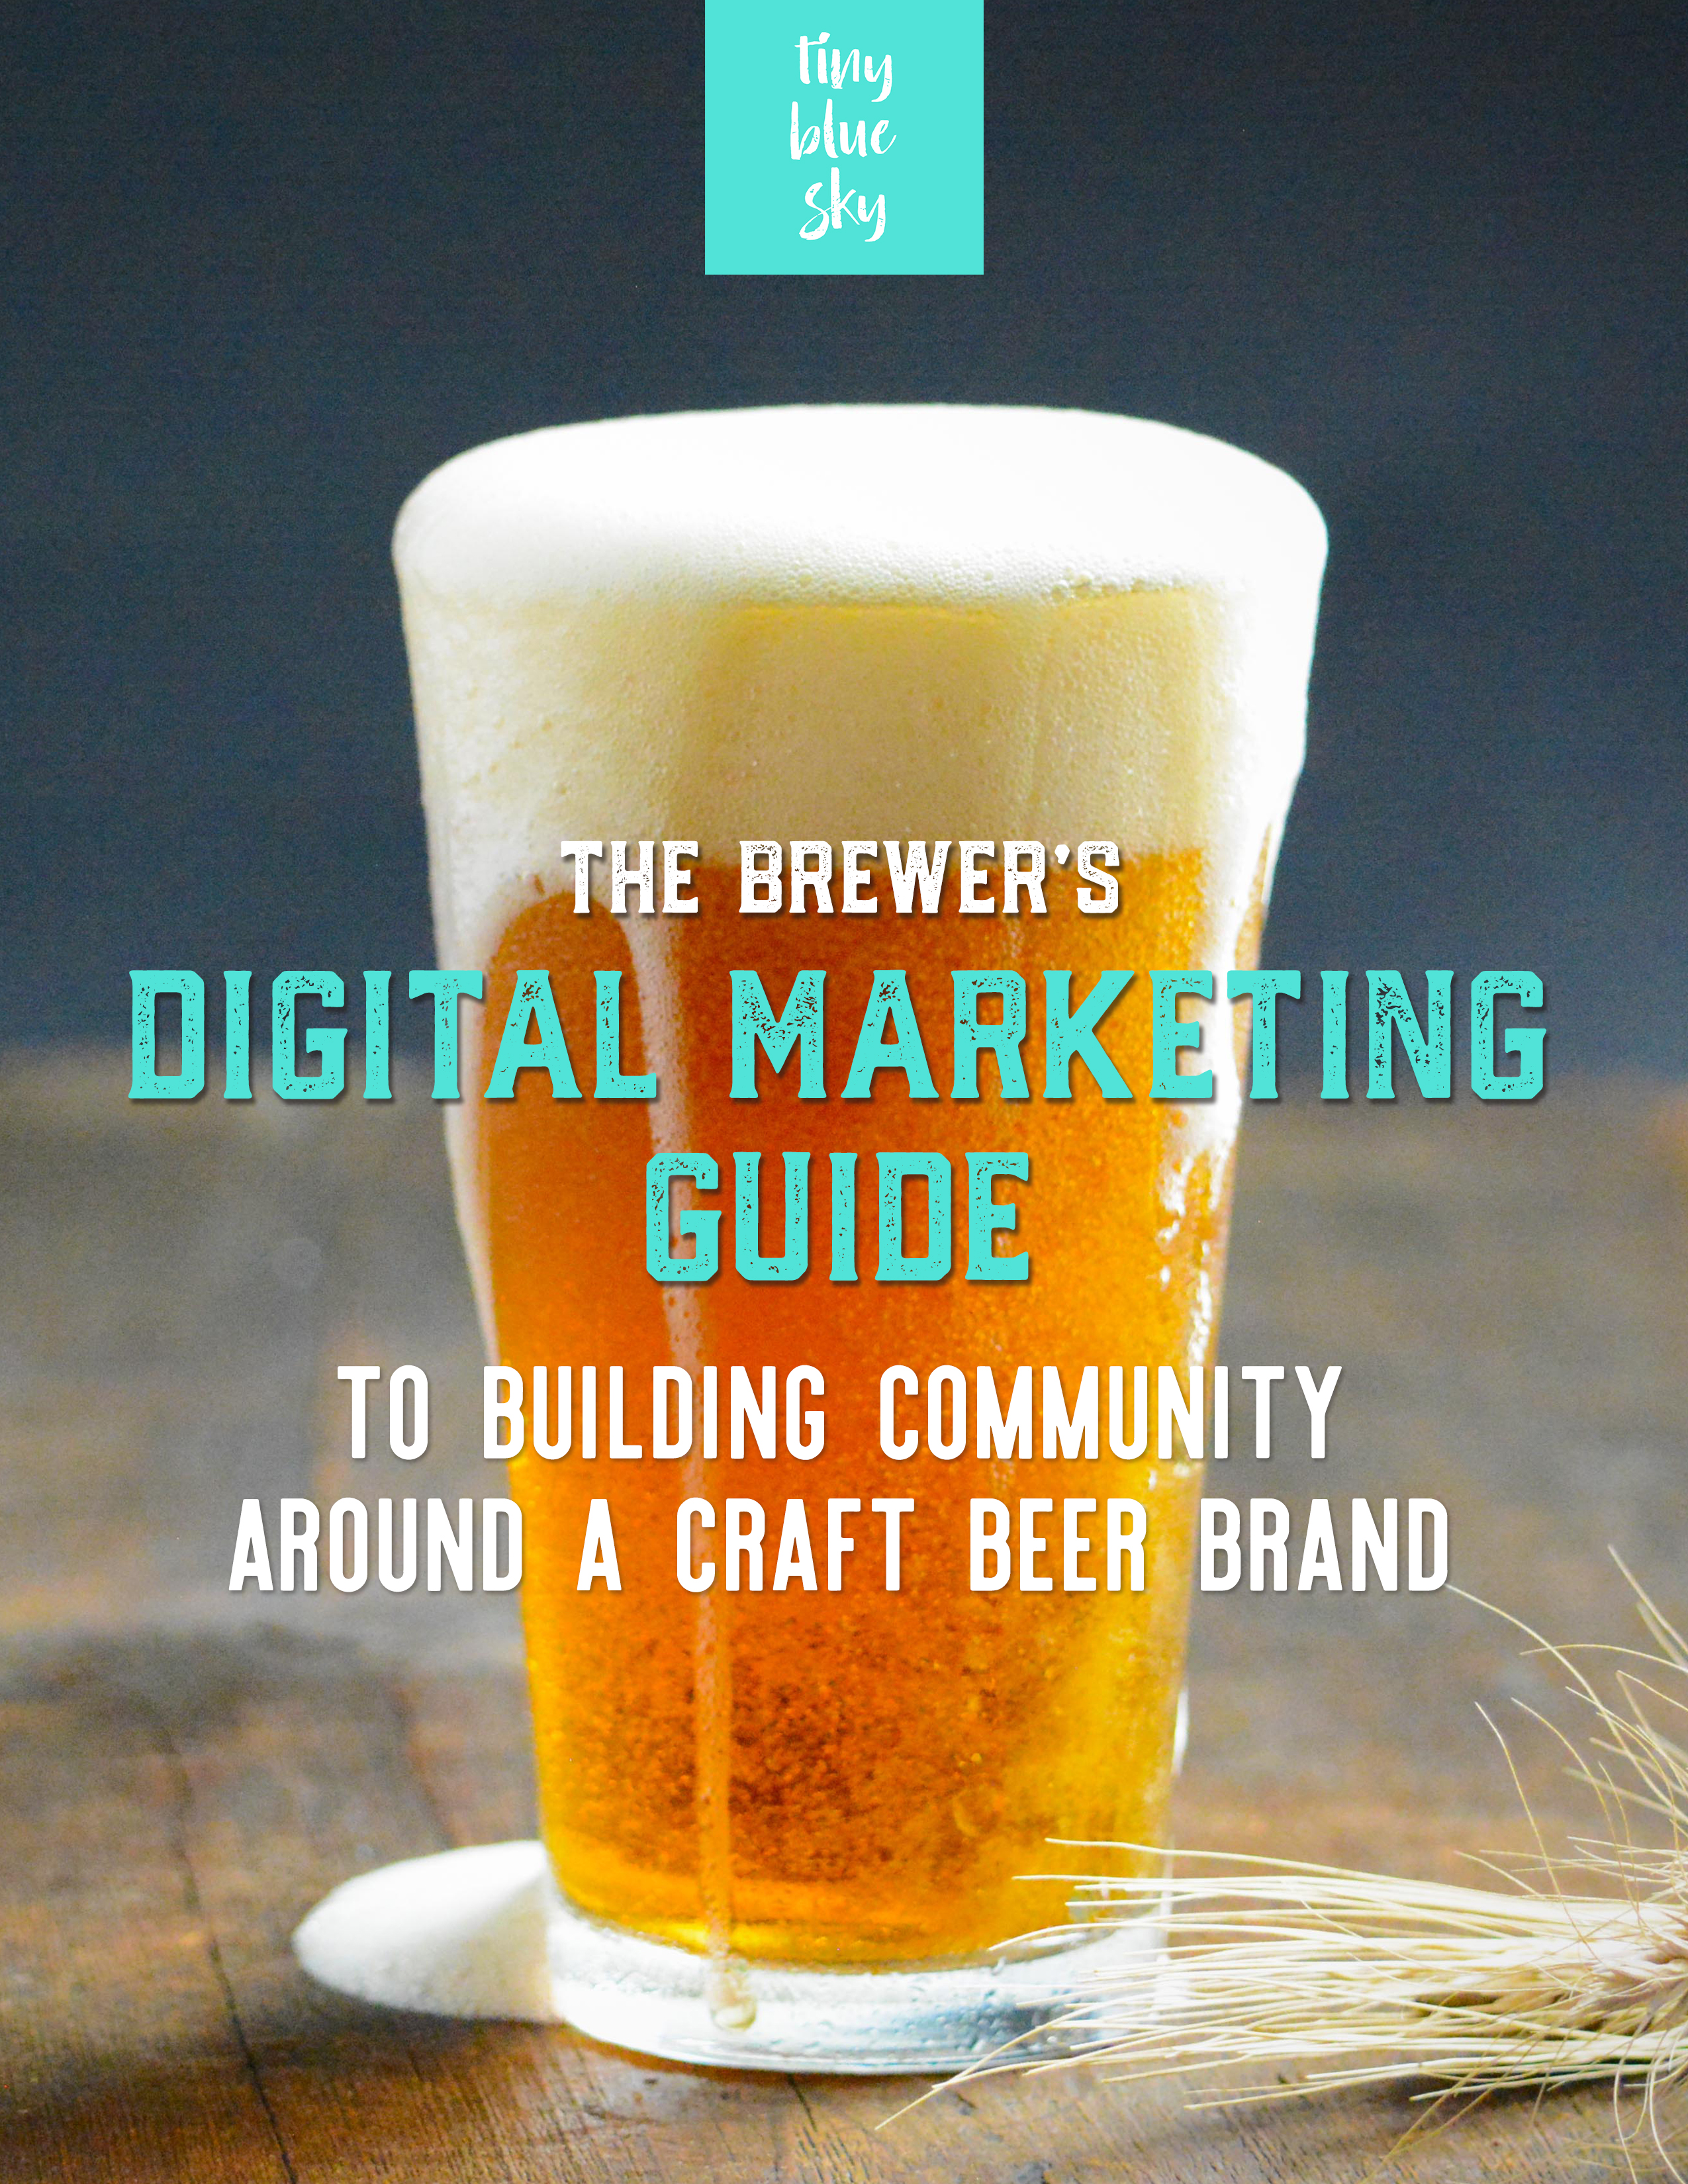 The Brewer's Digital Marketing Guide to Building Community Around a Craft Beer Brand